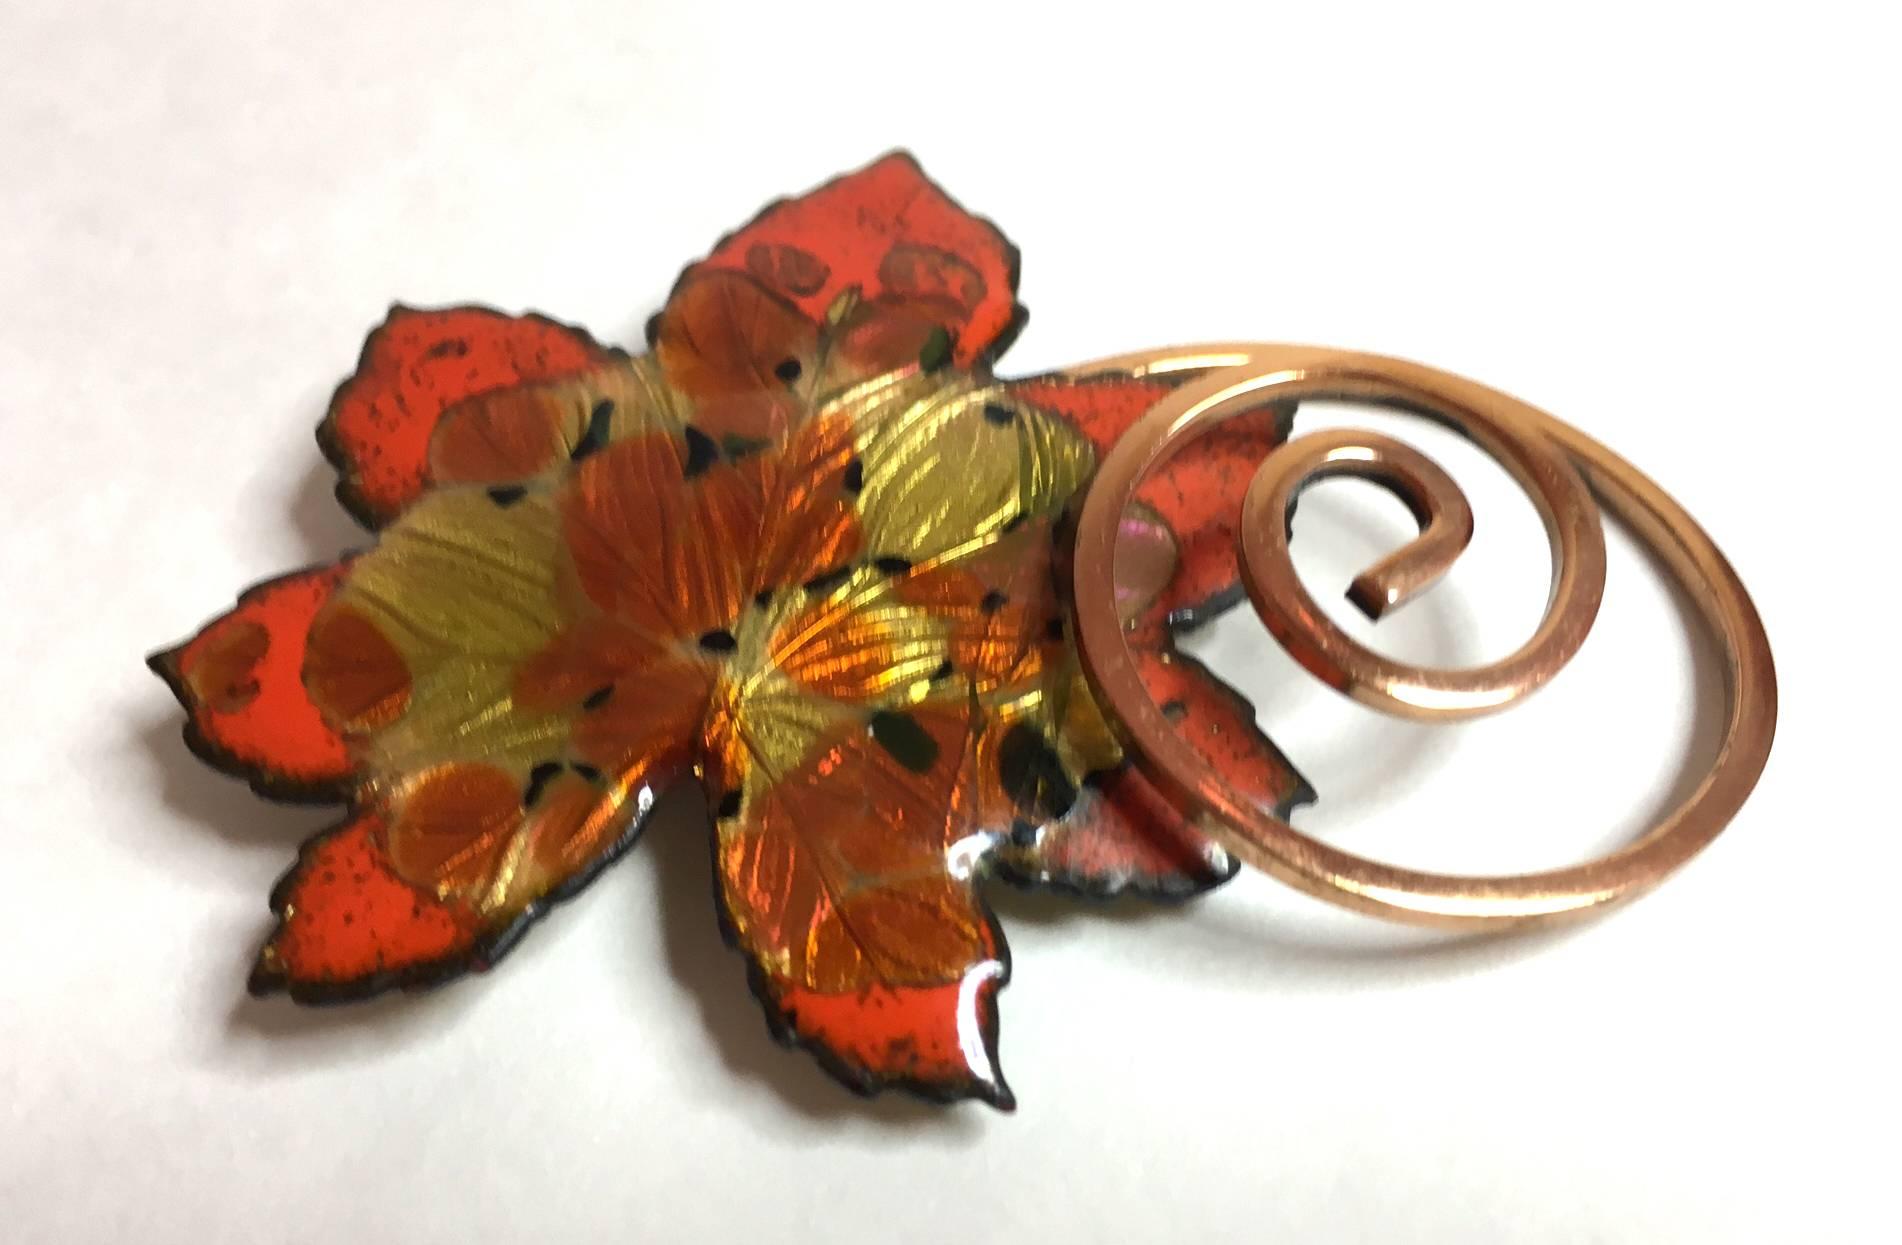 This copper and enamelled maple leaf brooch by Matisse ,a division of Renoir of California that specialized in enamelwork,  is executed in an elaborate multi-fired brilliant orange and multi colored enamel. Designed by Jerry Fels, who would later go